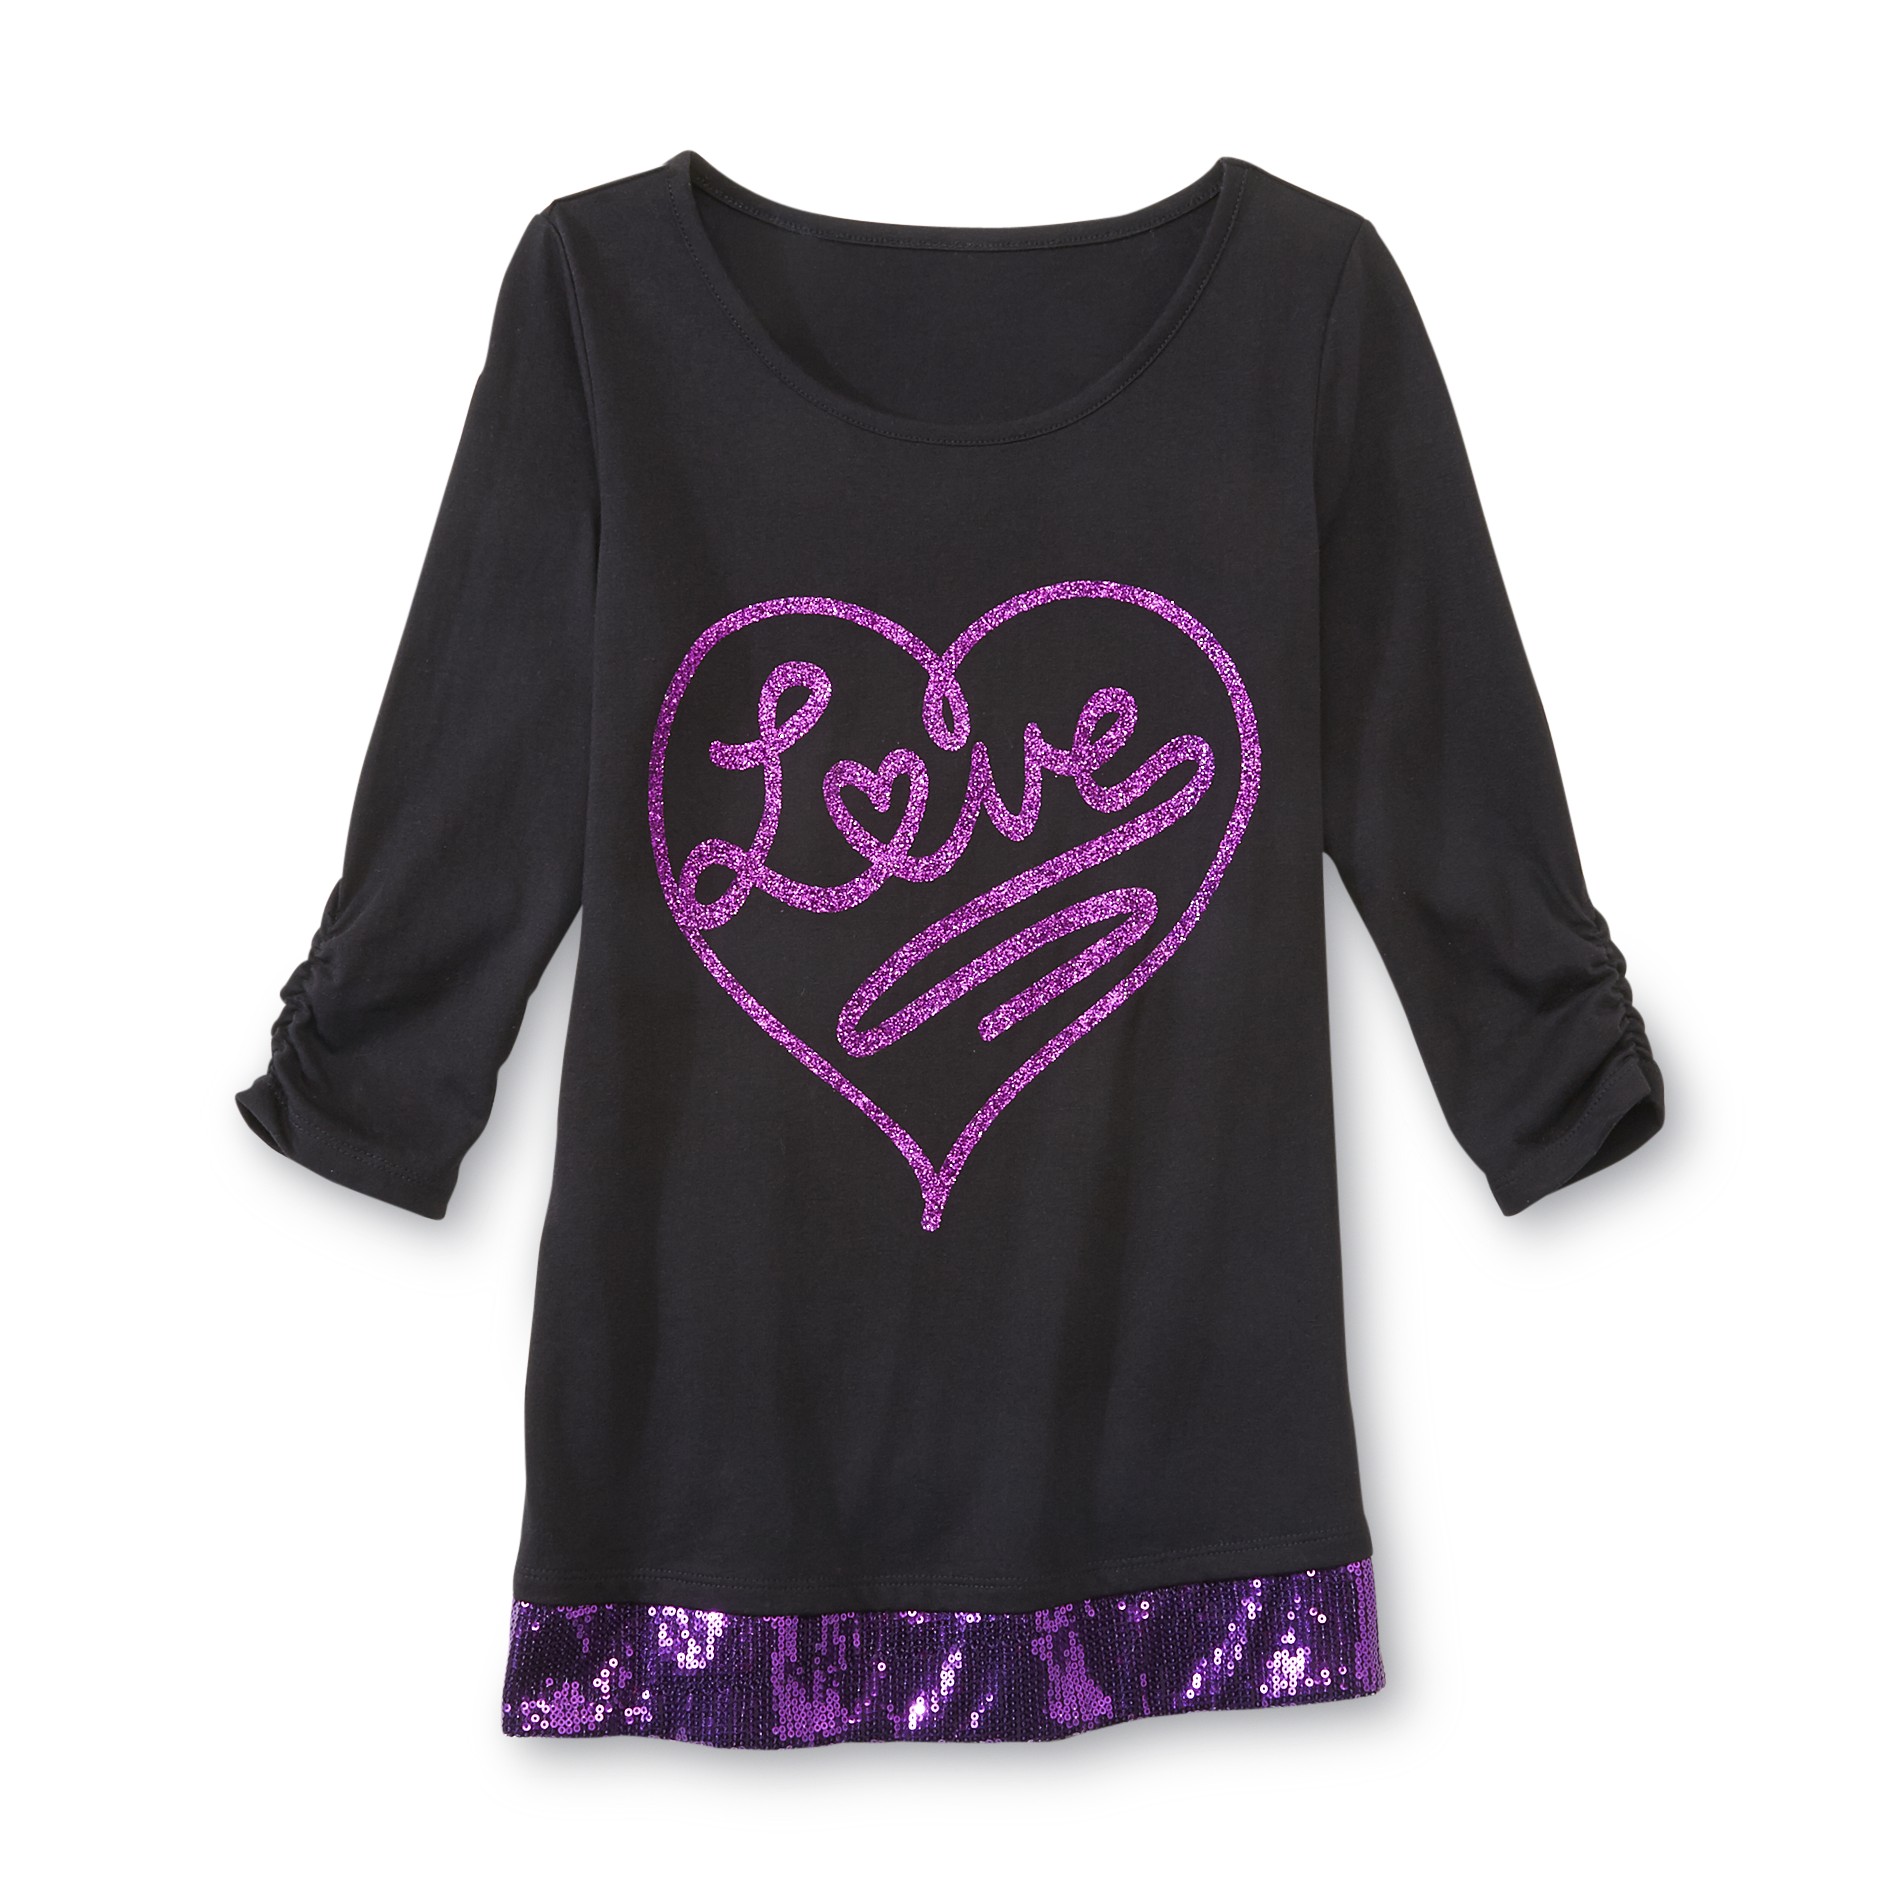 Canyon River Blues Girl's Graphic Top - Love